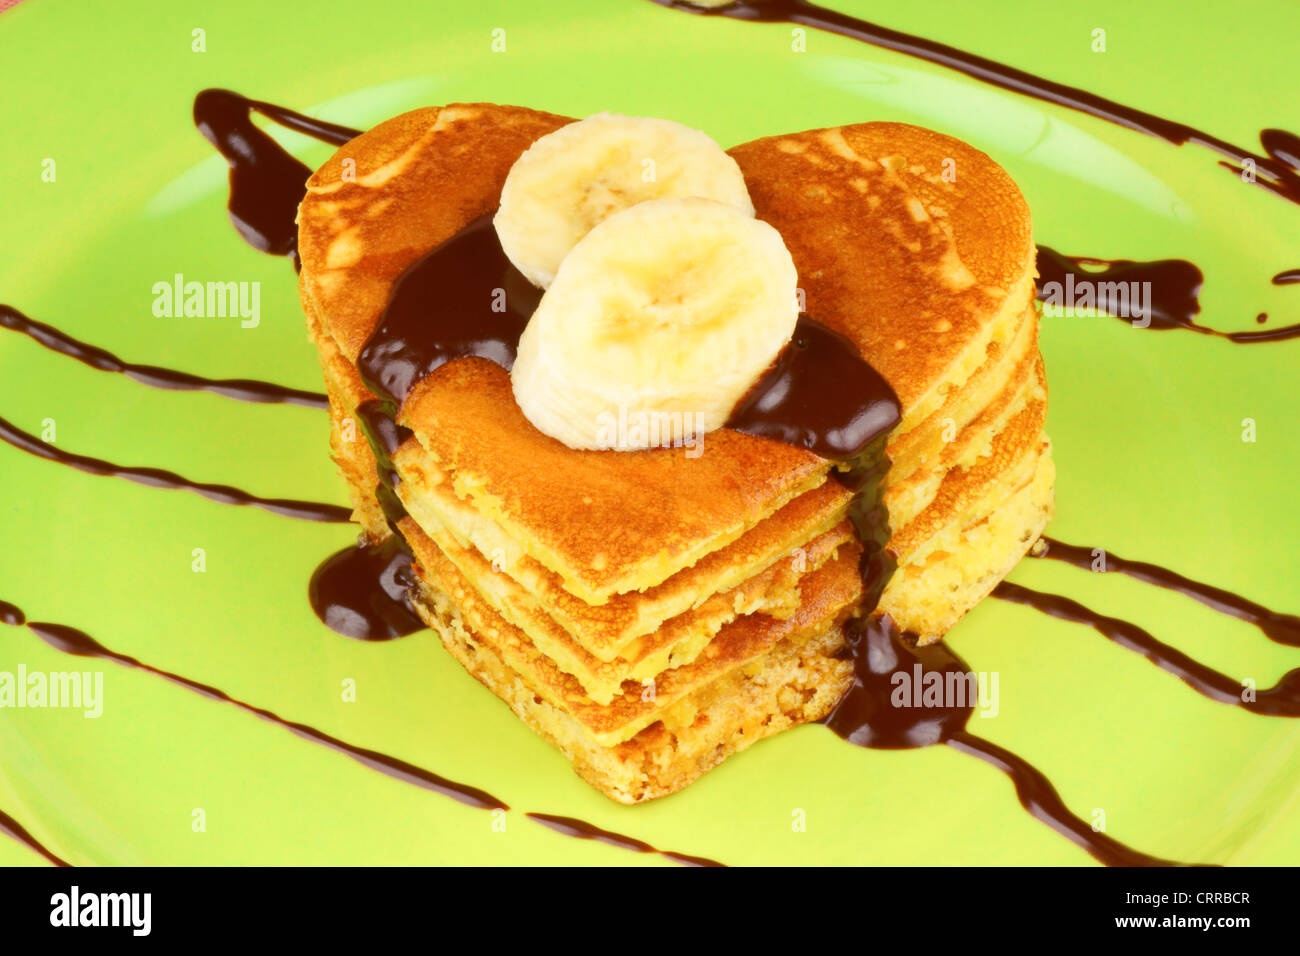 Heart shaped pancakes with chocolate sauce and banana slices on a green dish. A perfect breakfast for Valentine's Day. Stock Photo